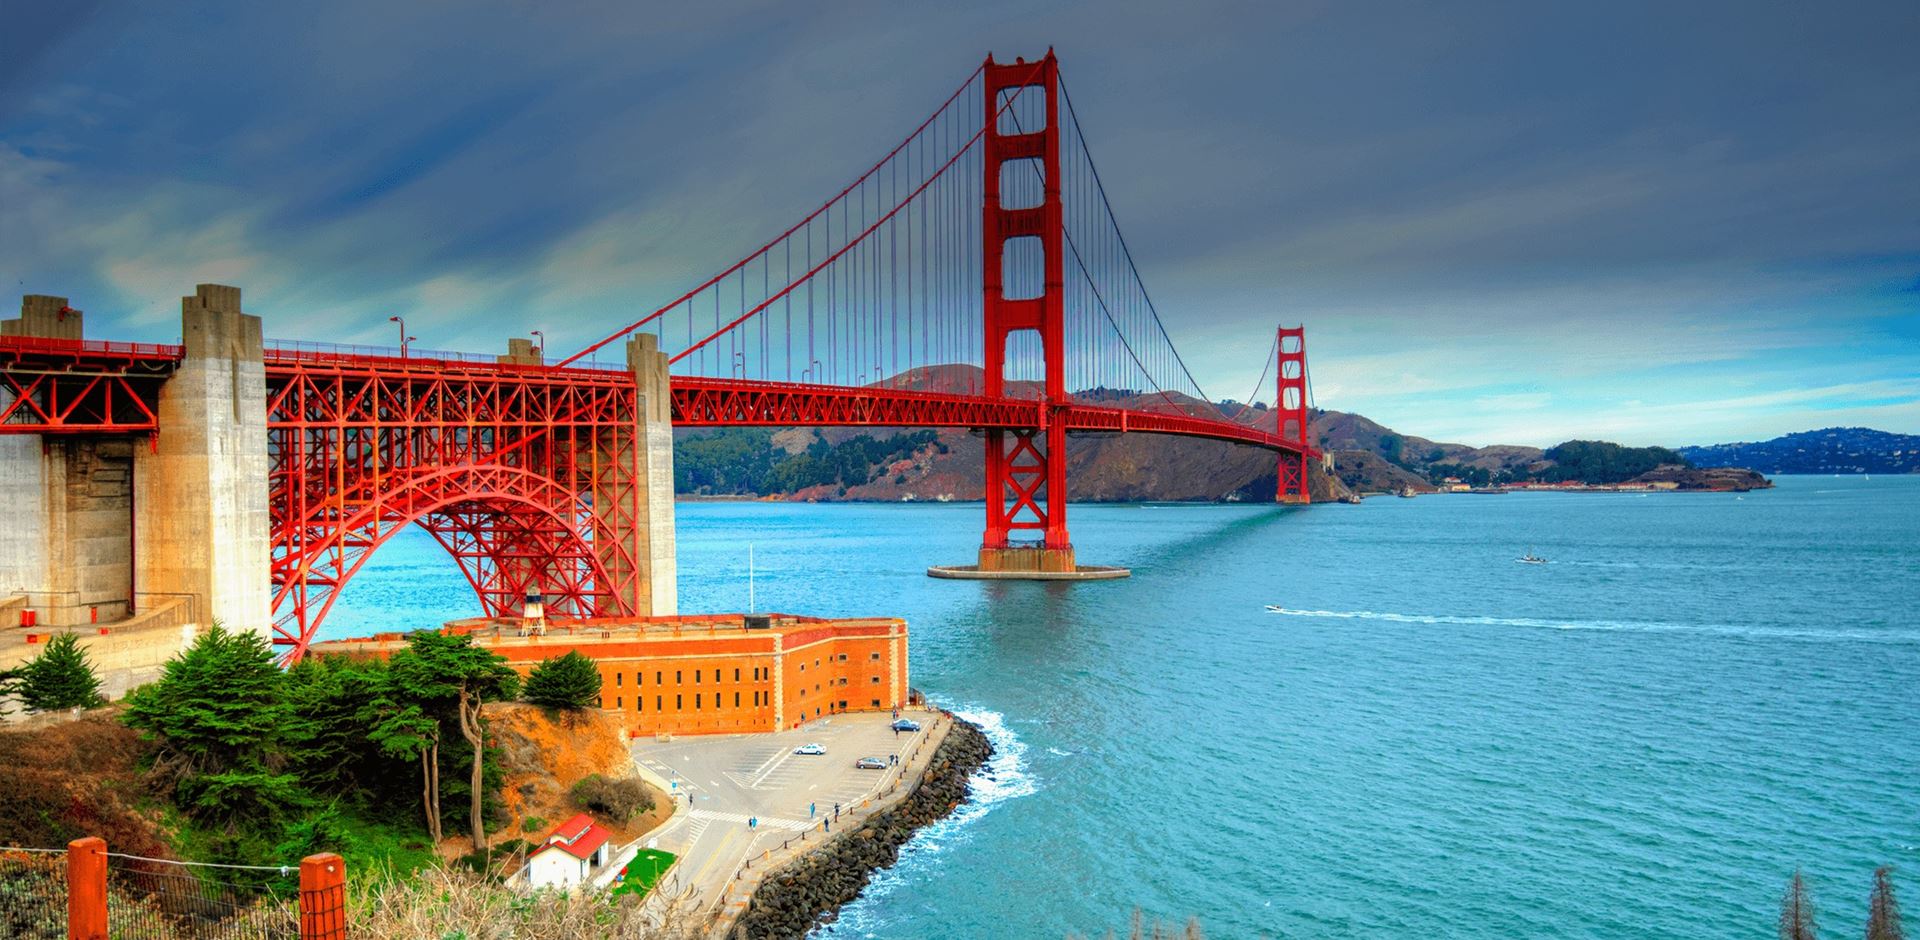 View of the Golden Gate Bridge over water and distant hills, San Francisco and Marin County near Sausalito, CA, US.